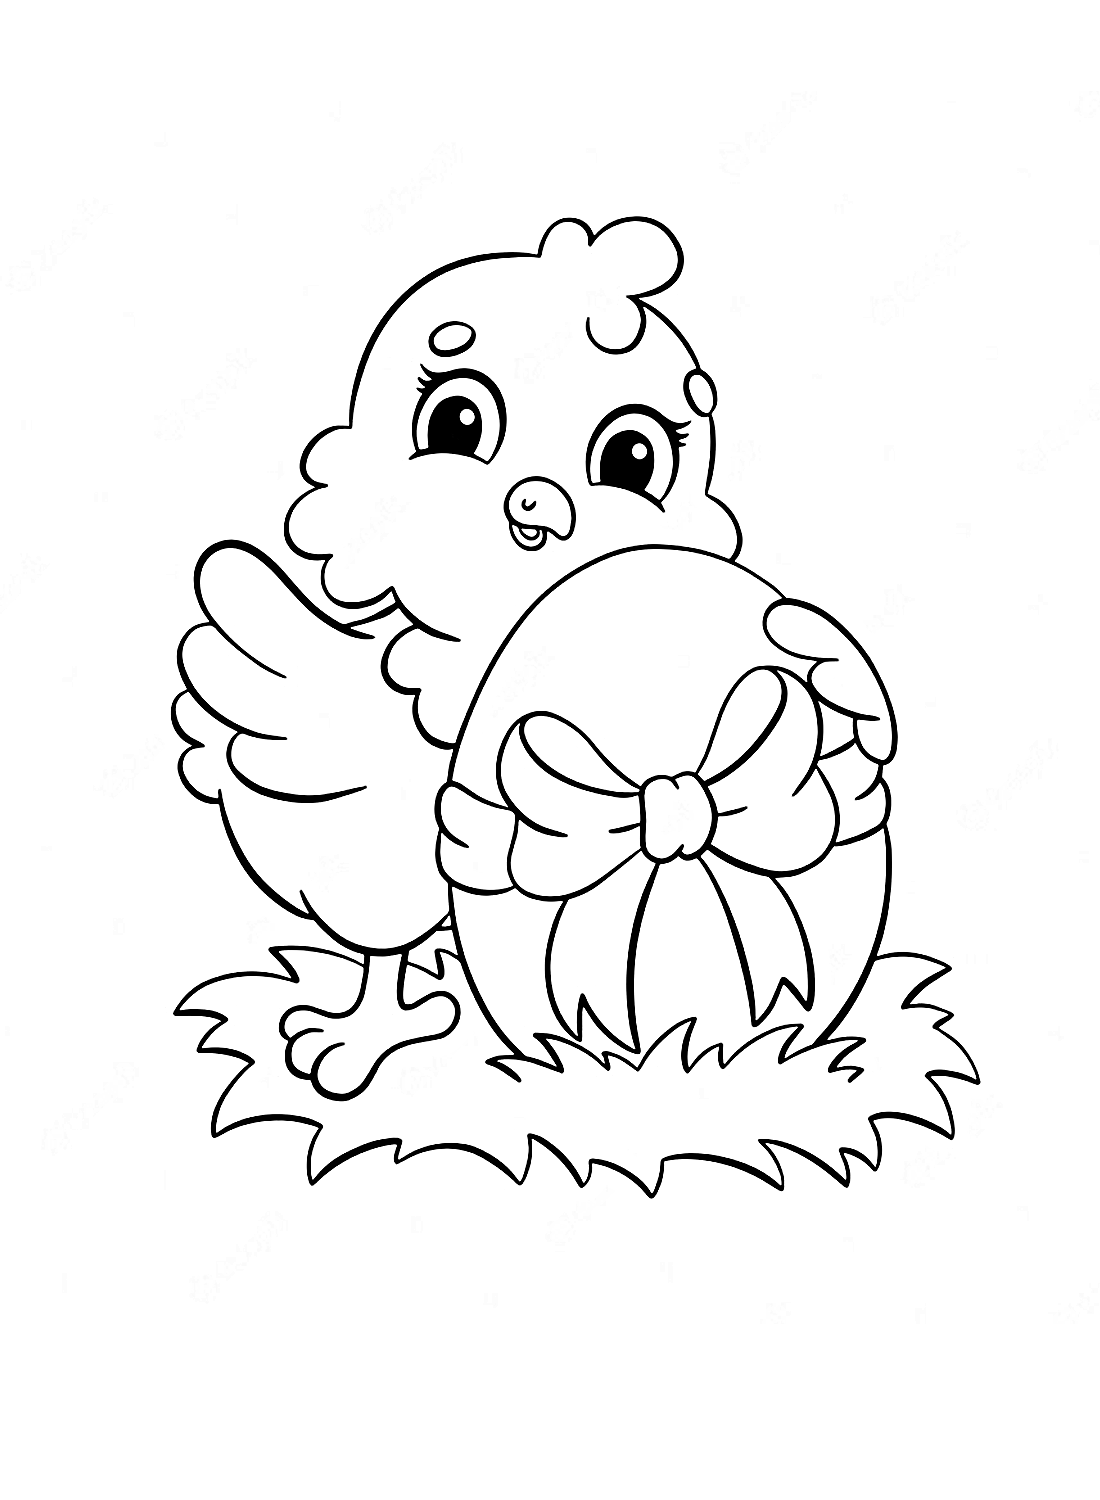 A chick and an egg Coloring Page